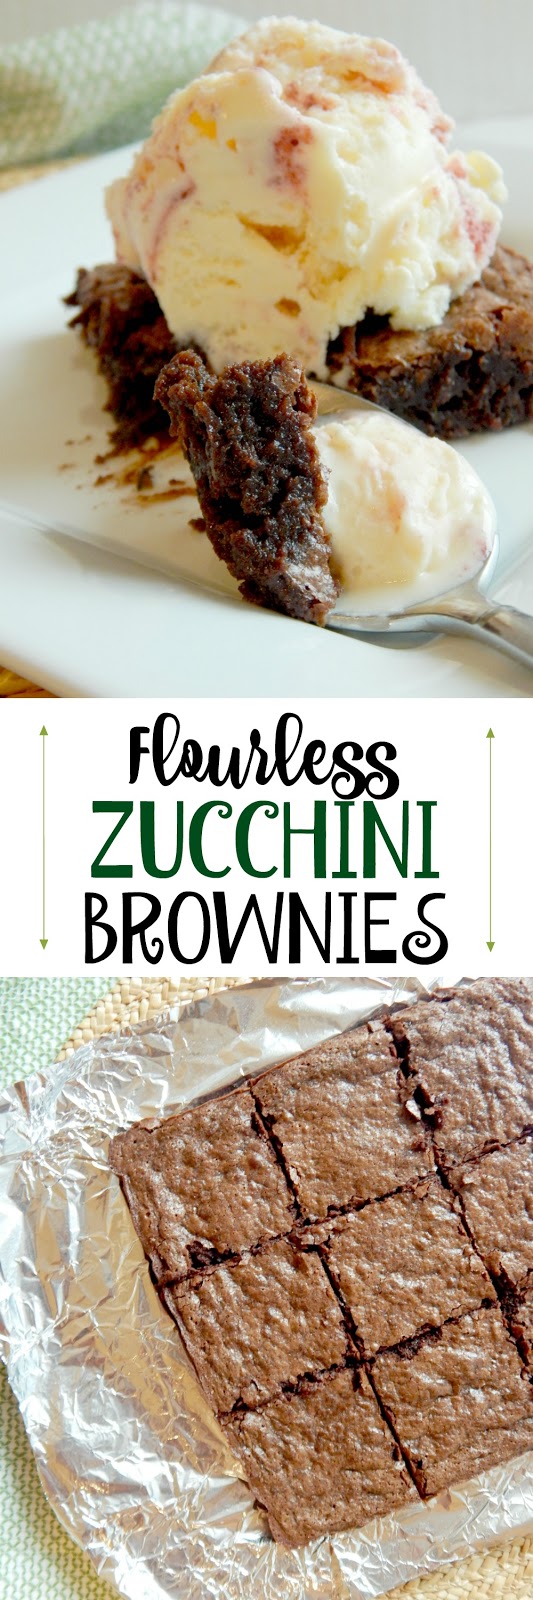 Flourless Zucchini Brownies....these gluten-free, super easy, brownies from scrach will be a hit!  Rich, fudgy and no one will notice the vegetable tucked inside! (sweetandsavoryfood.com)